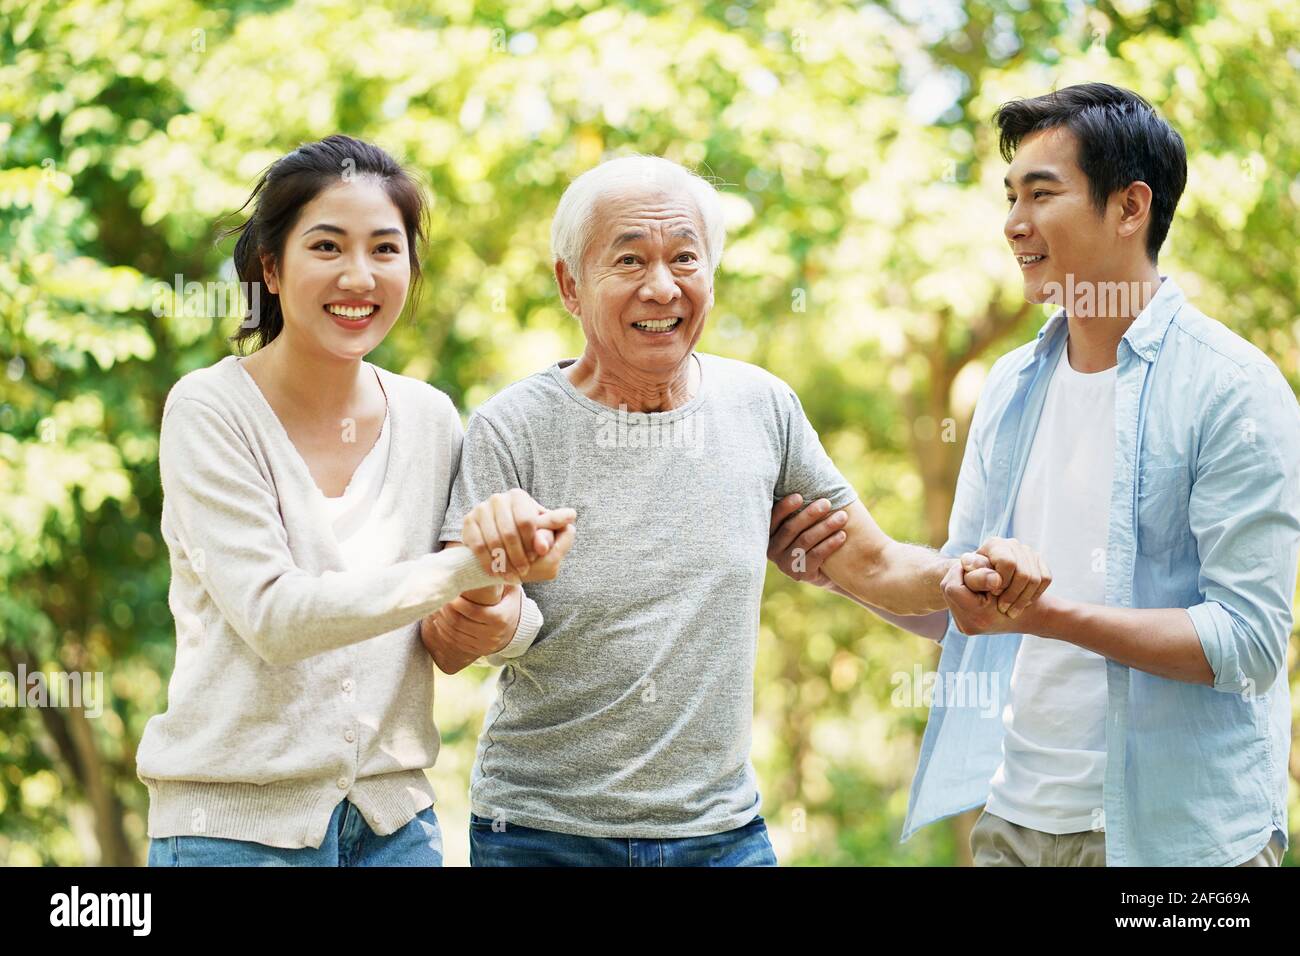 young asian couple helping father stand up and walk outdoors in park Stock Photo